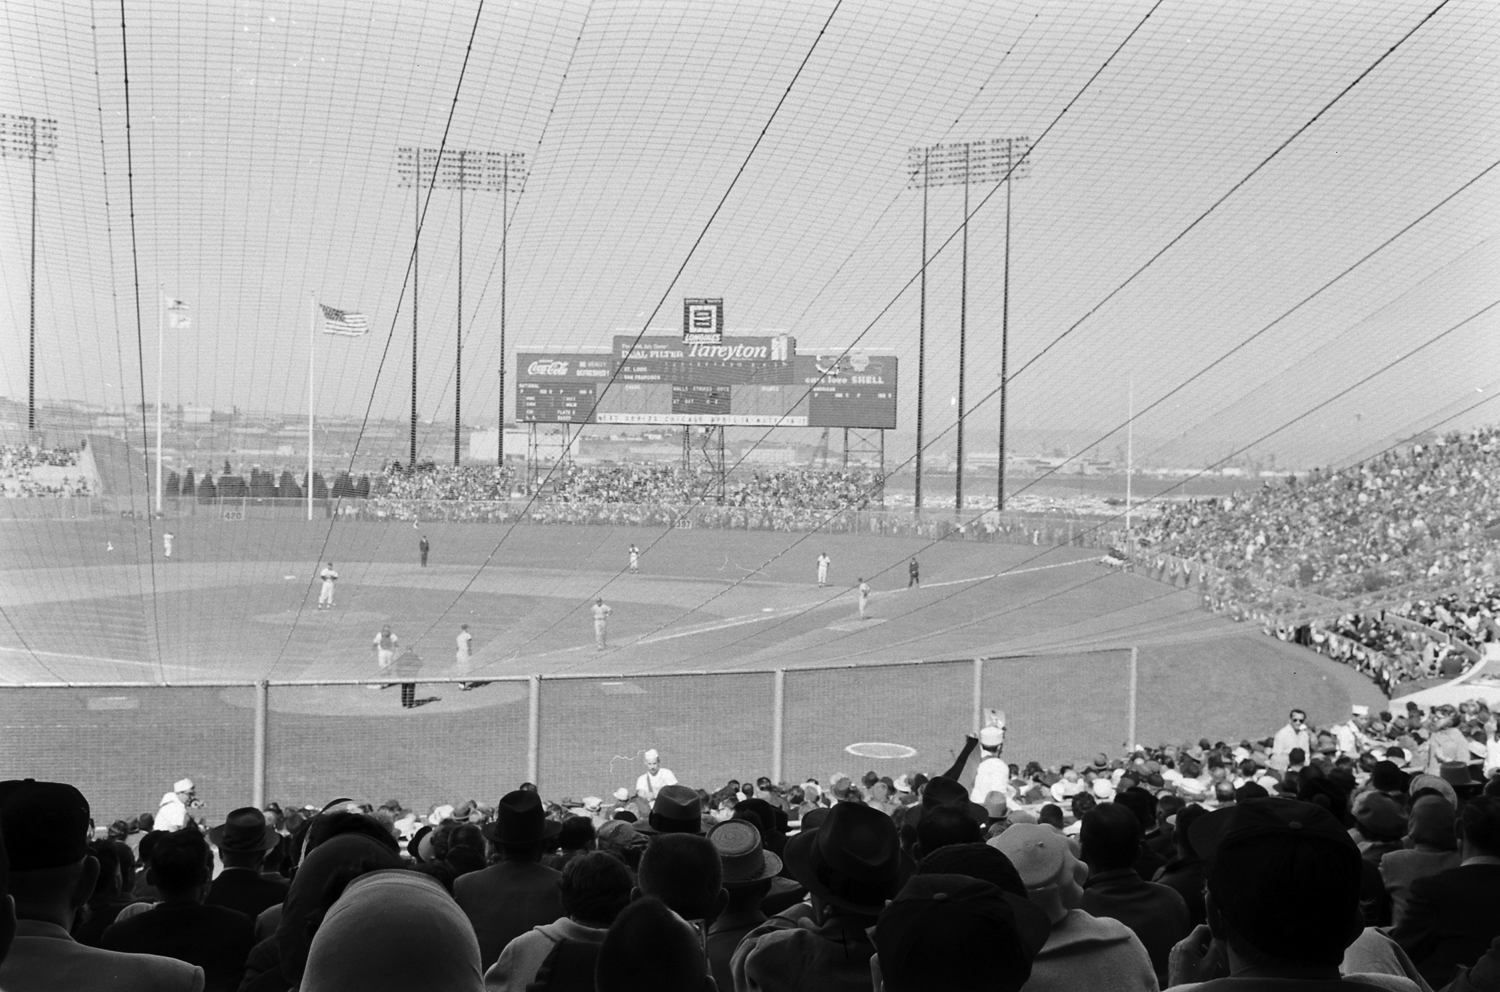 Opening Day at Candlestick Park, 1960.